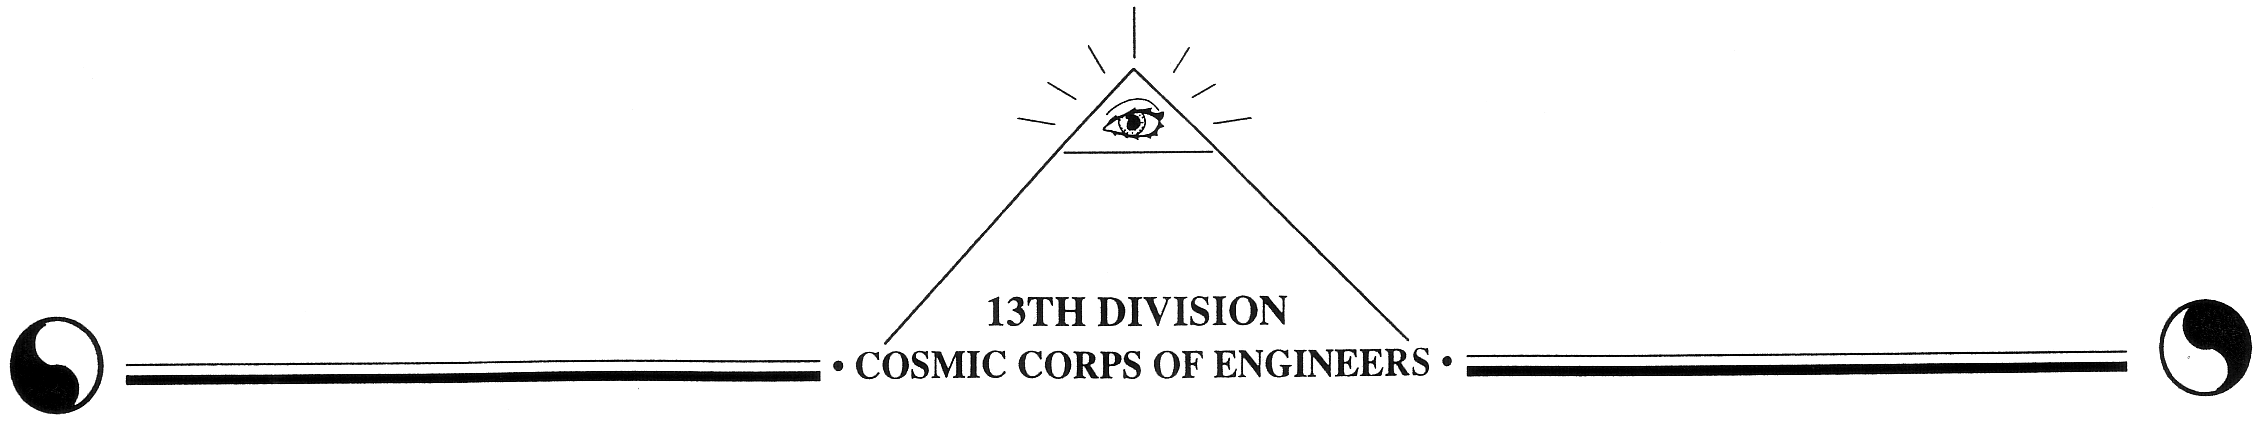 13th Division - Cosmic Corps of Engineers 